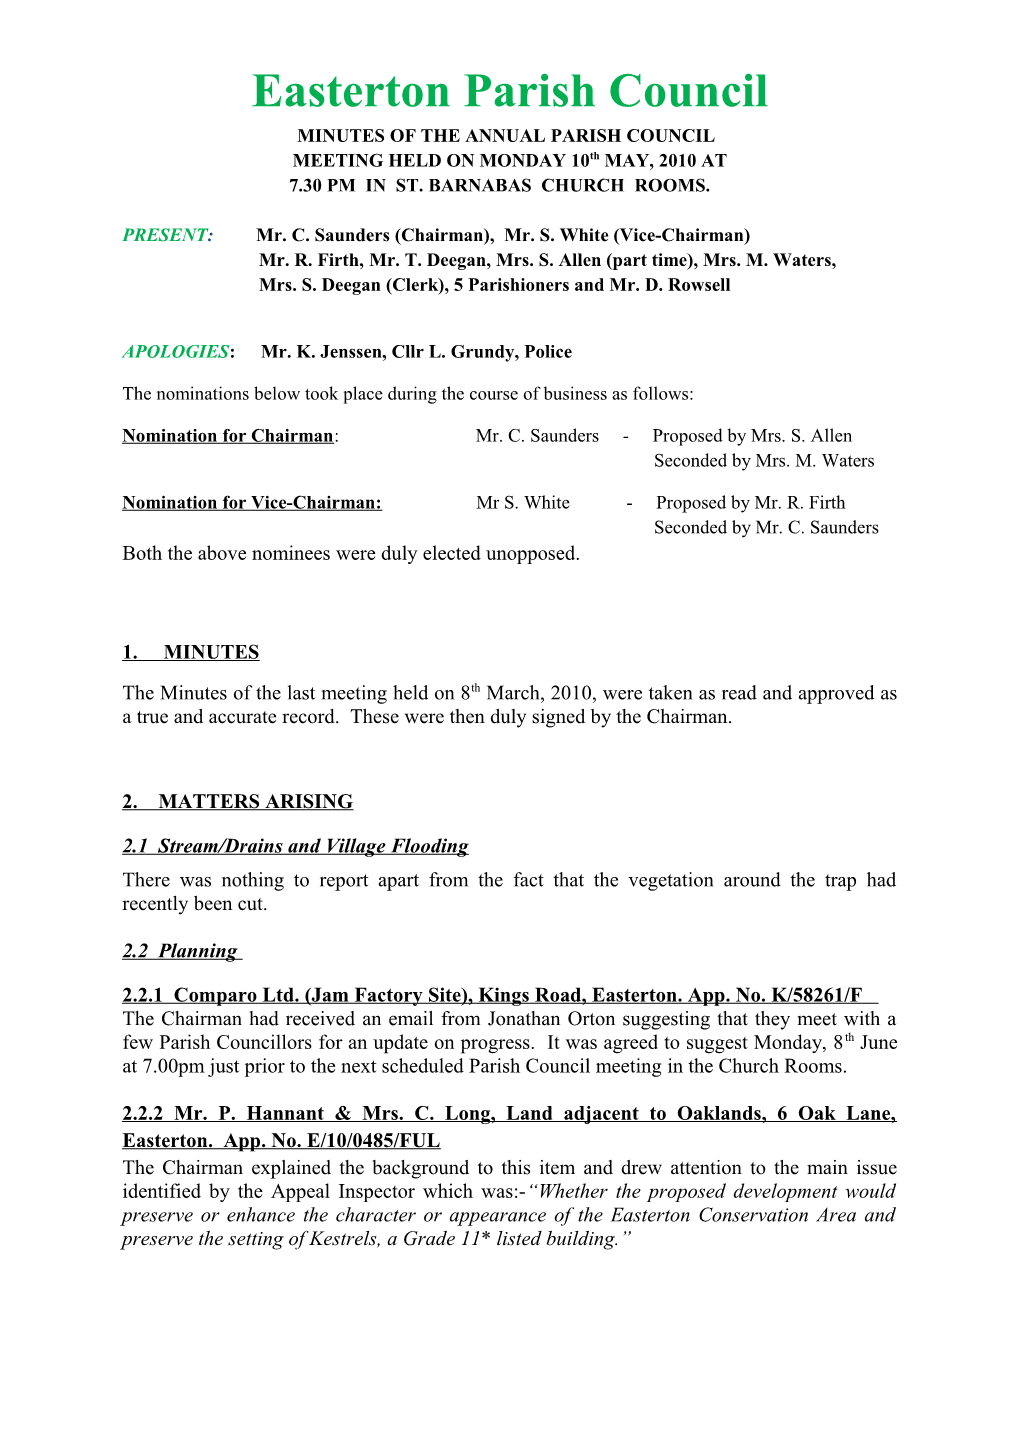 Minutes of Theannual Parish Council